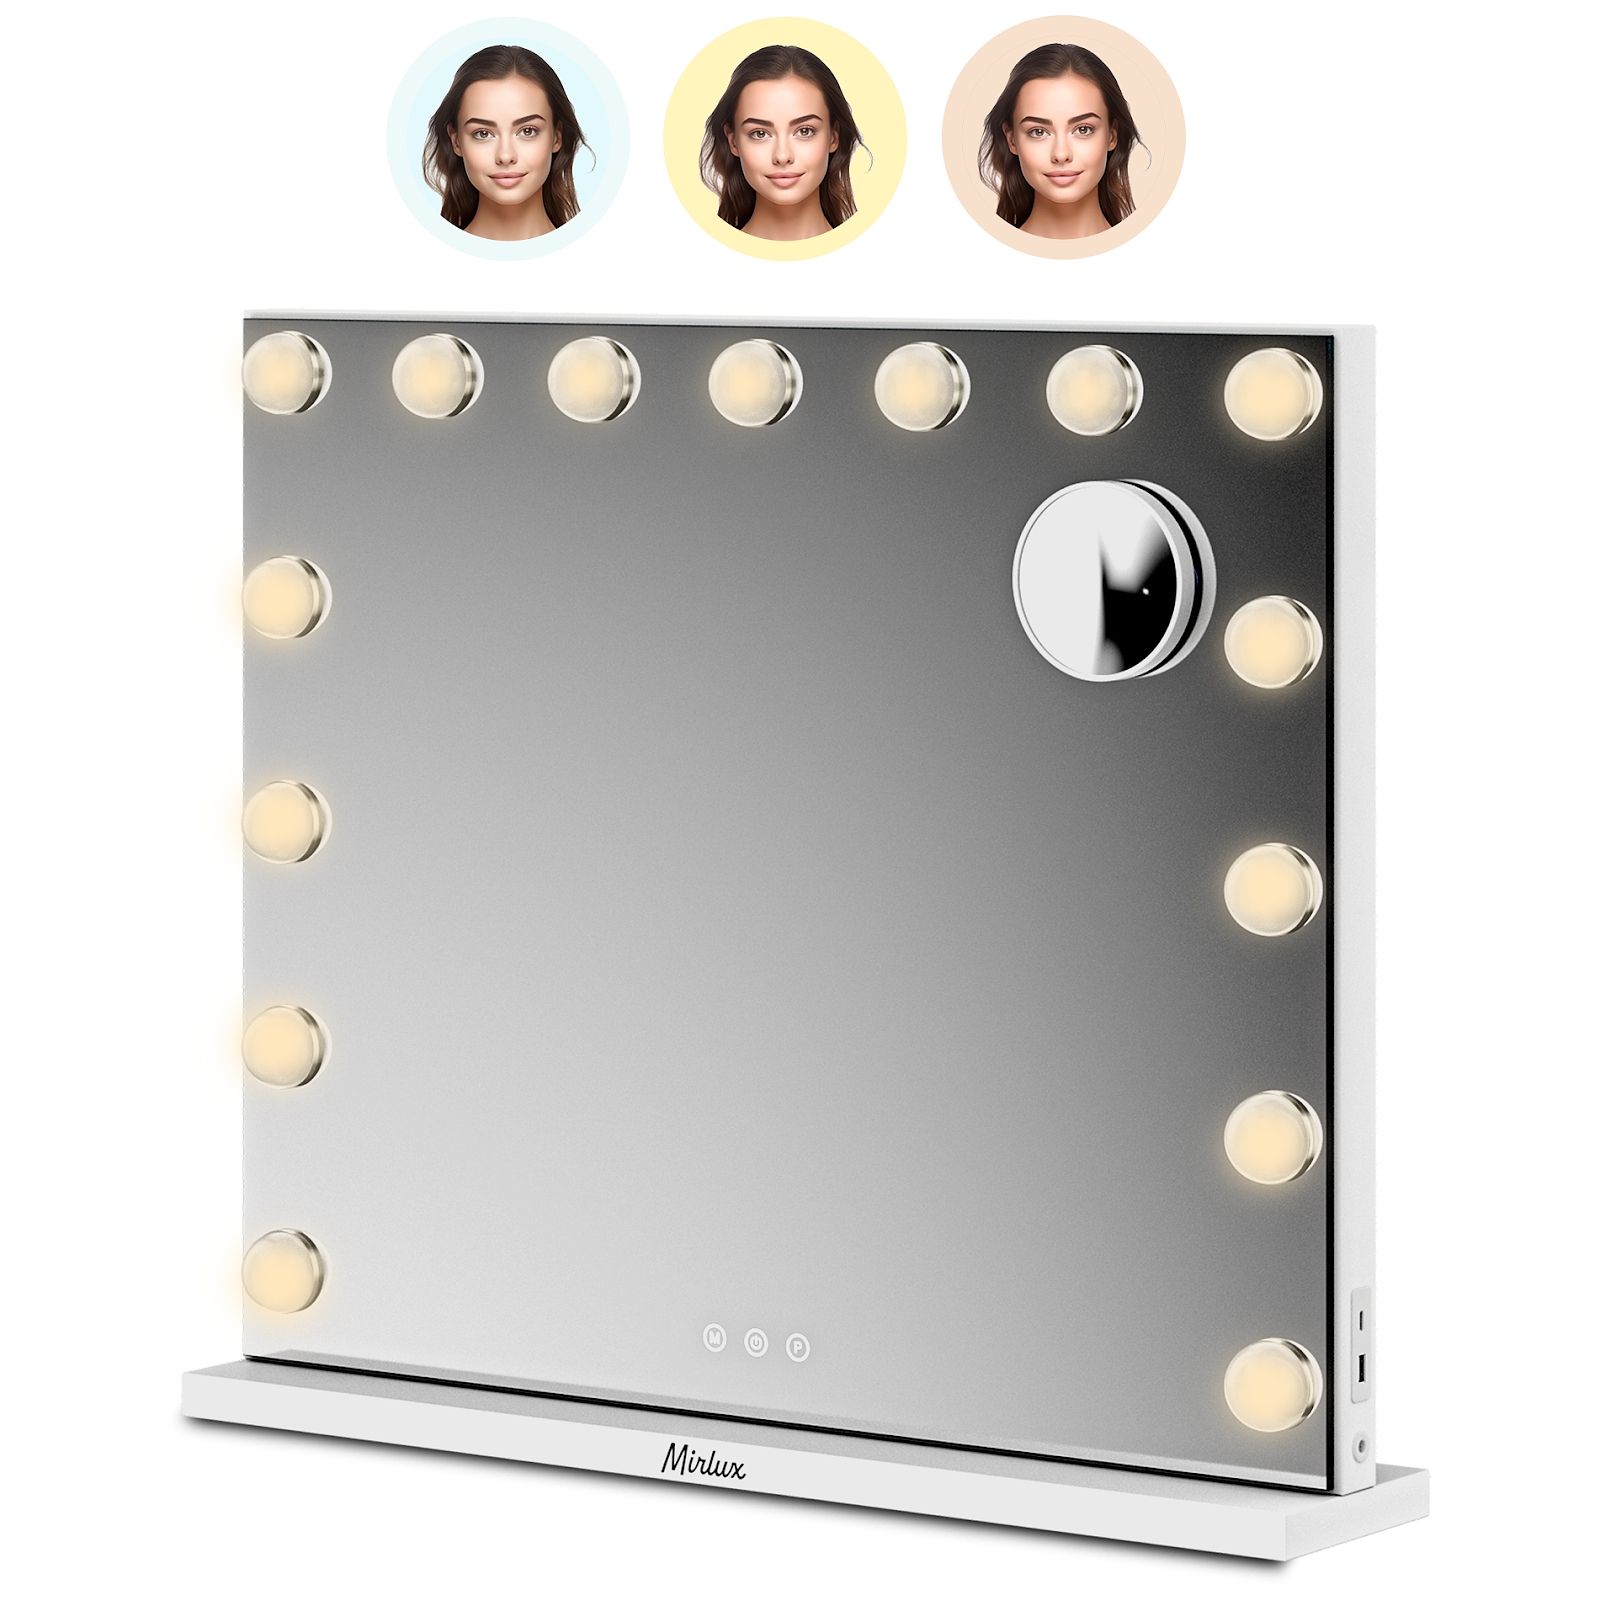 Mirlux Hollywood make up mirror wit Lighting - 10X Magnification - Hanging - White - 58X48cm